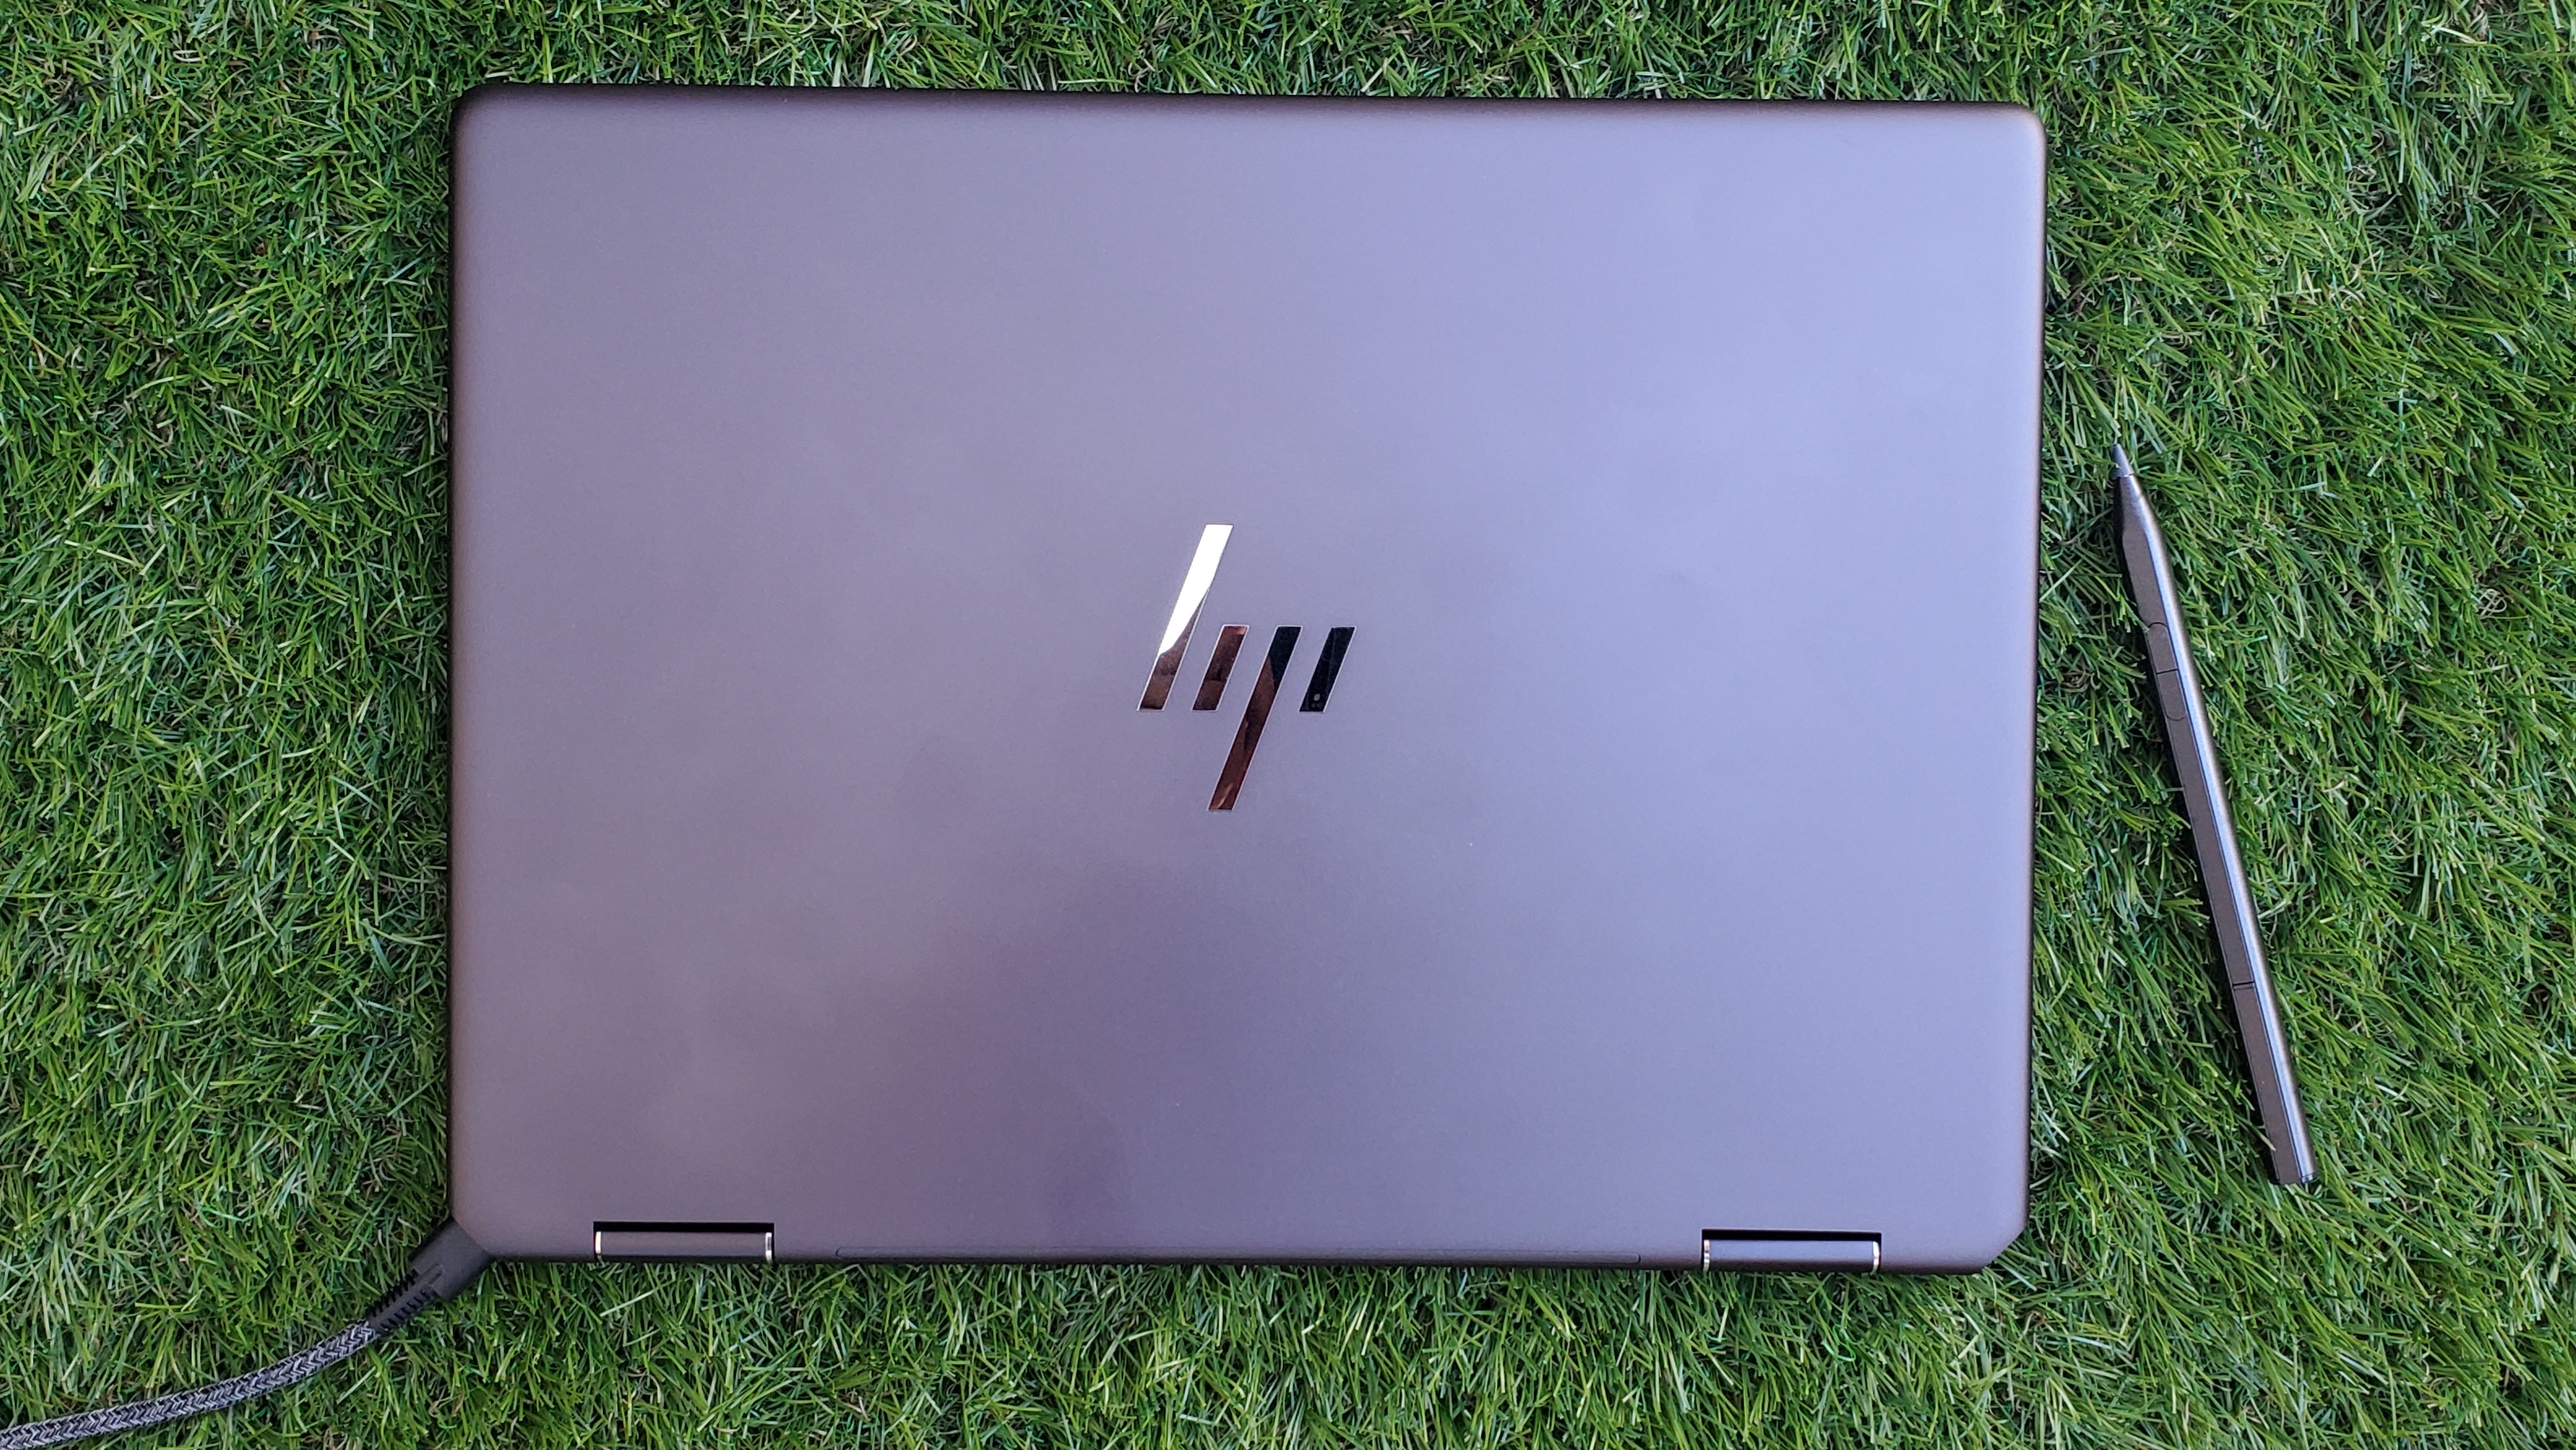 HP Spectre x360 13.5-inch 2-in-1 review: Puts up a strong fight 